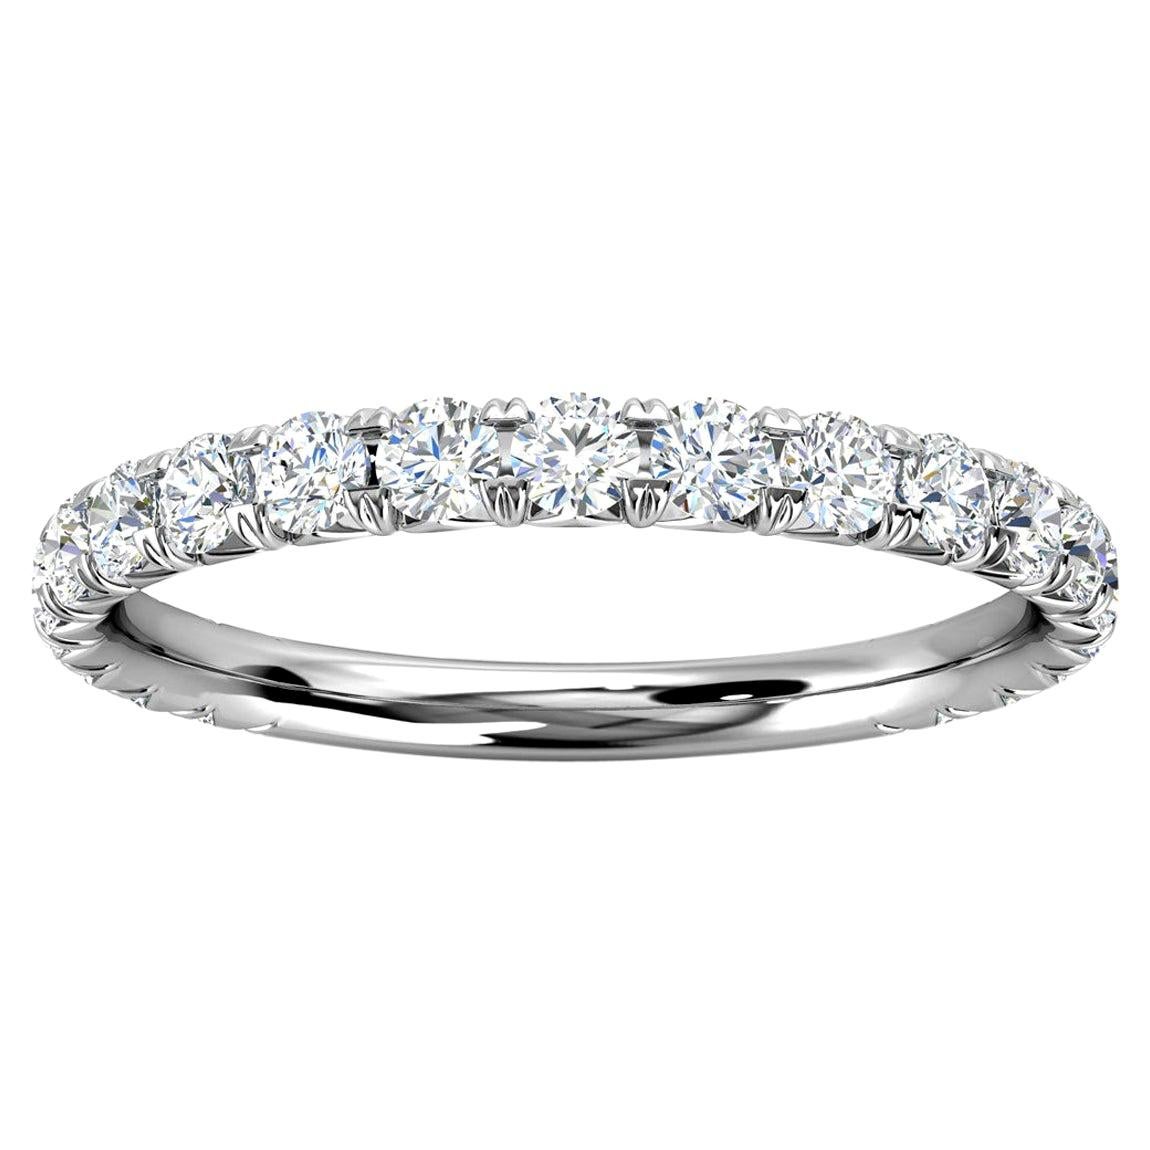 For Sale:  14k White Gold GIA French Pave Diamond Ring '1/2 Ct. Tw'